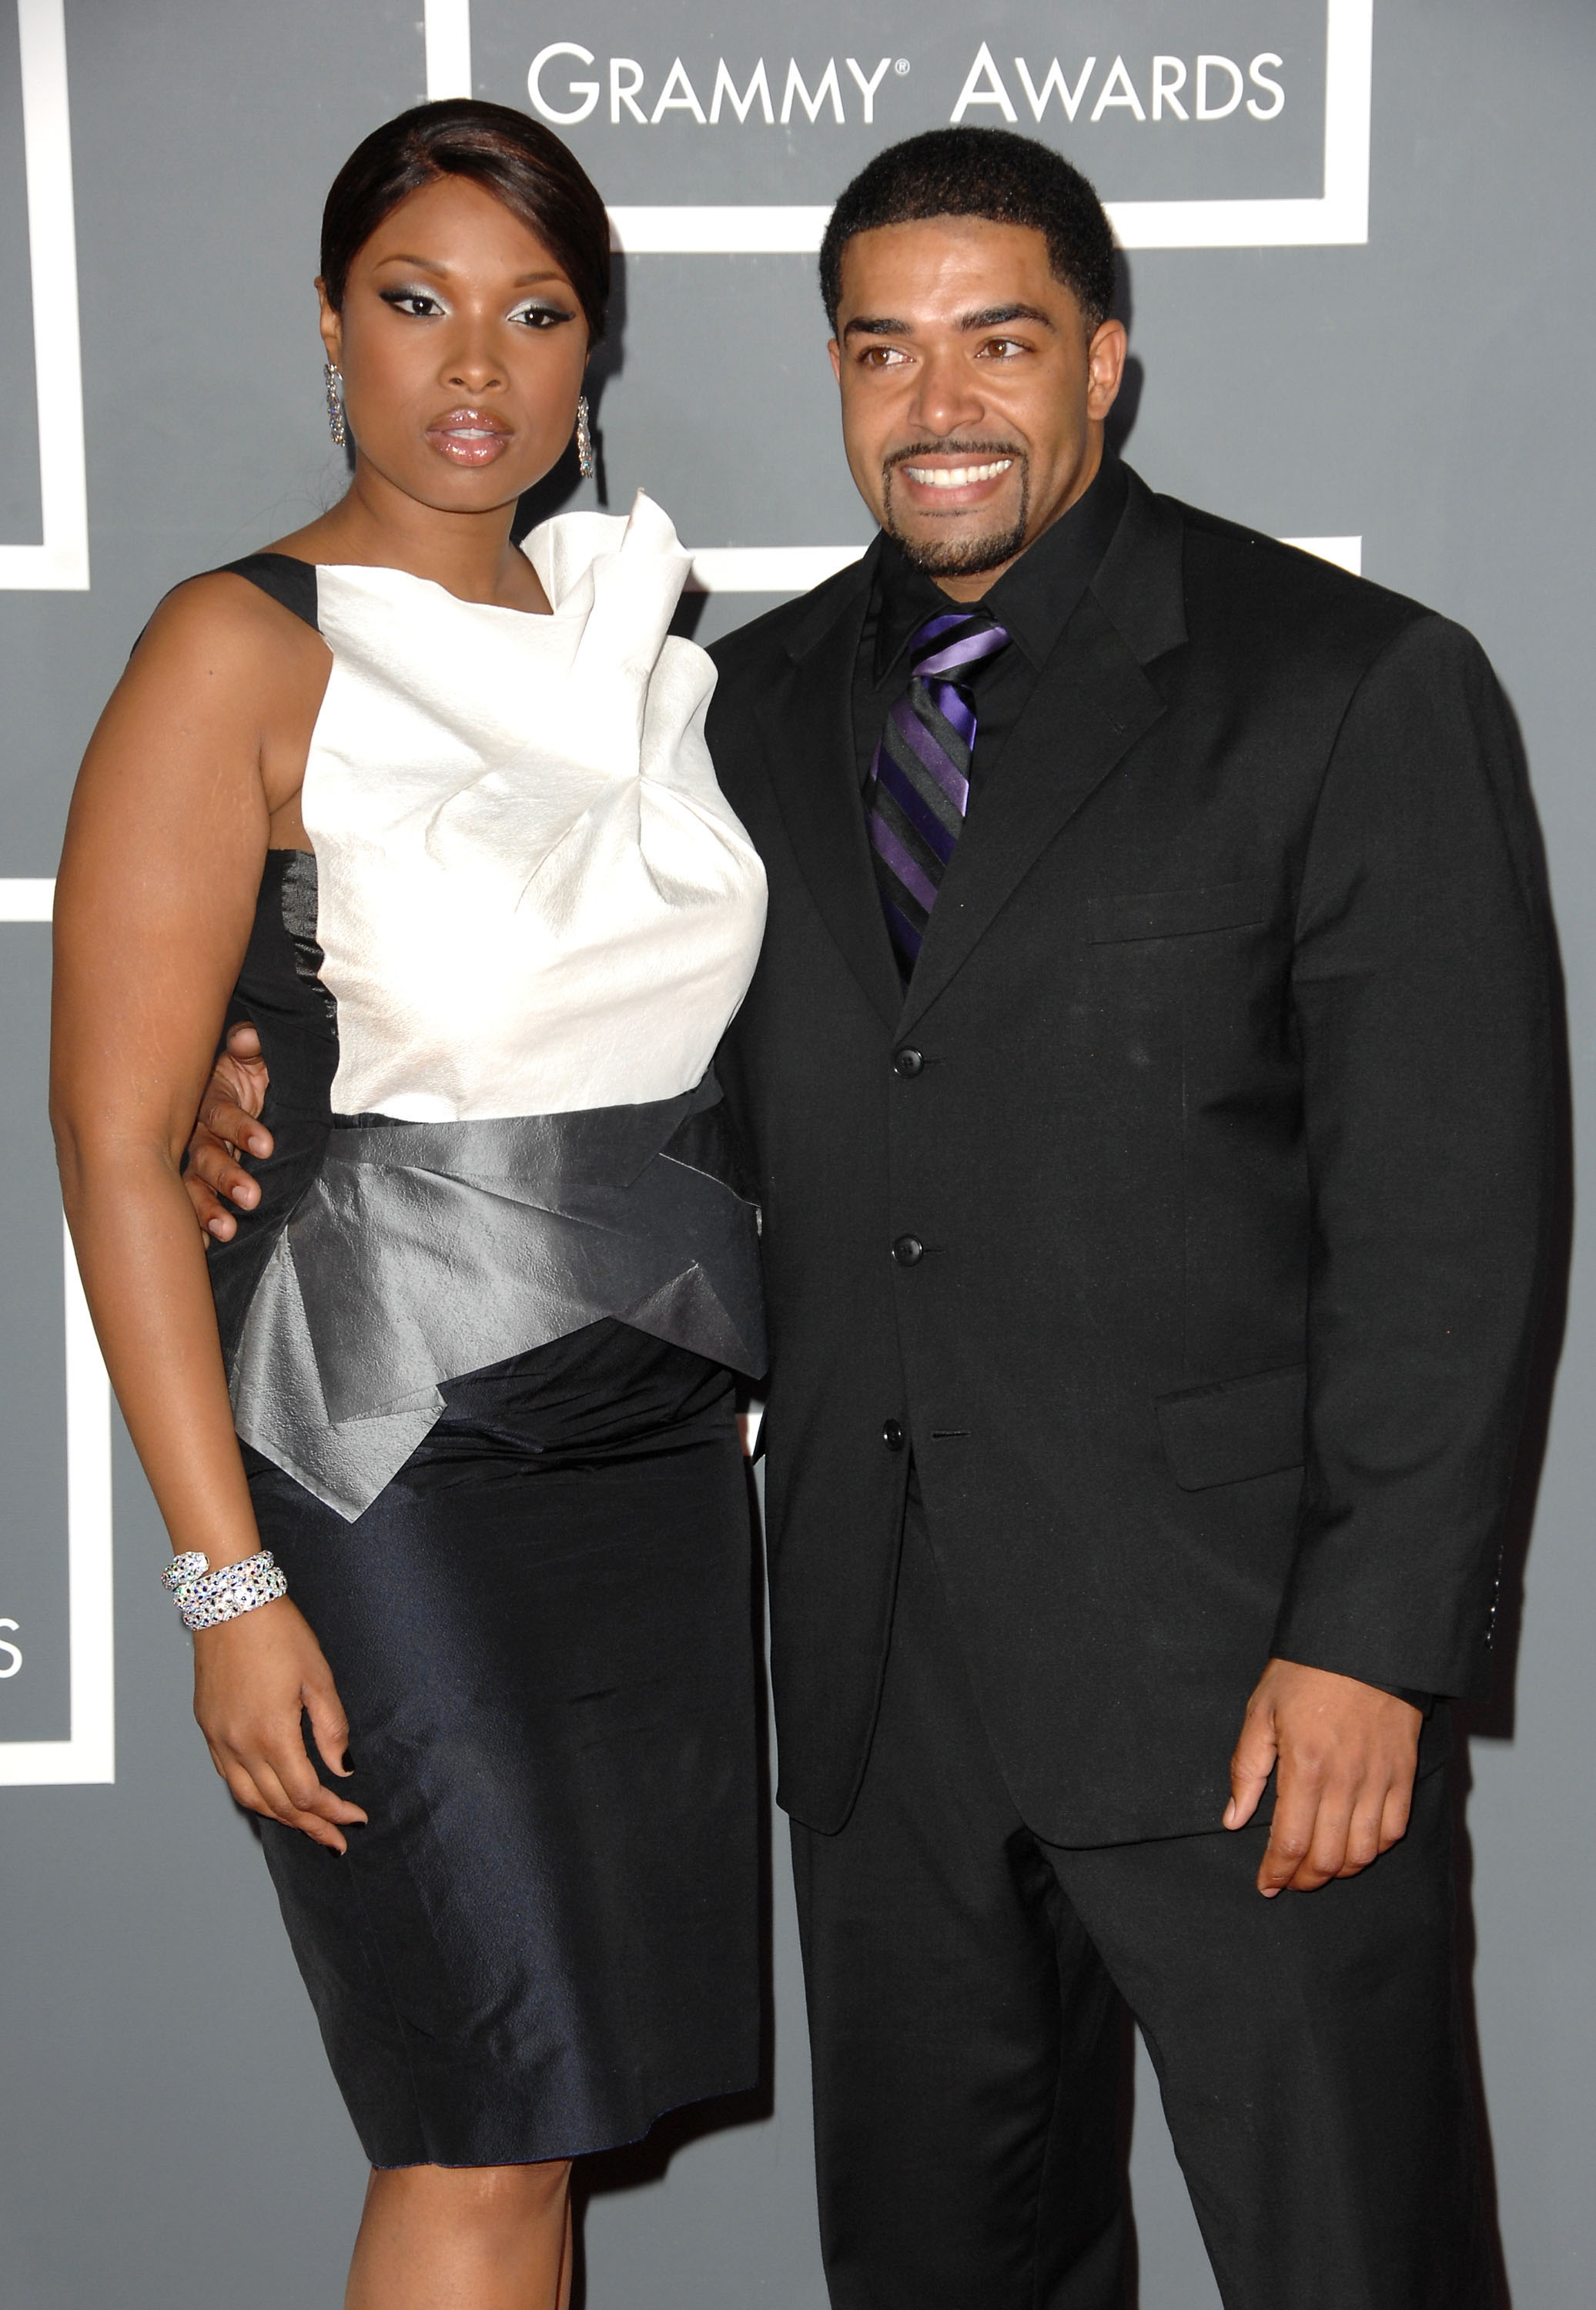 Jennifer Hudson and David Otunga attend the Grammy Awards on February 8, 2009 in Los Angeles, California. | Source: Getty Images